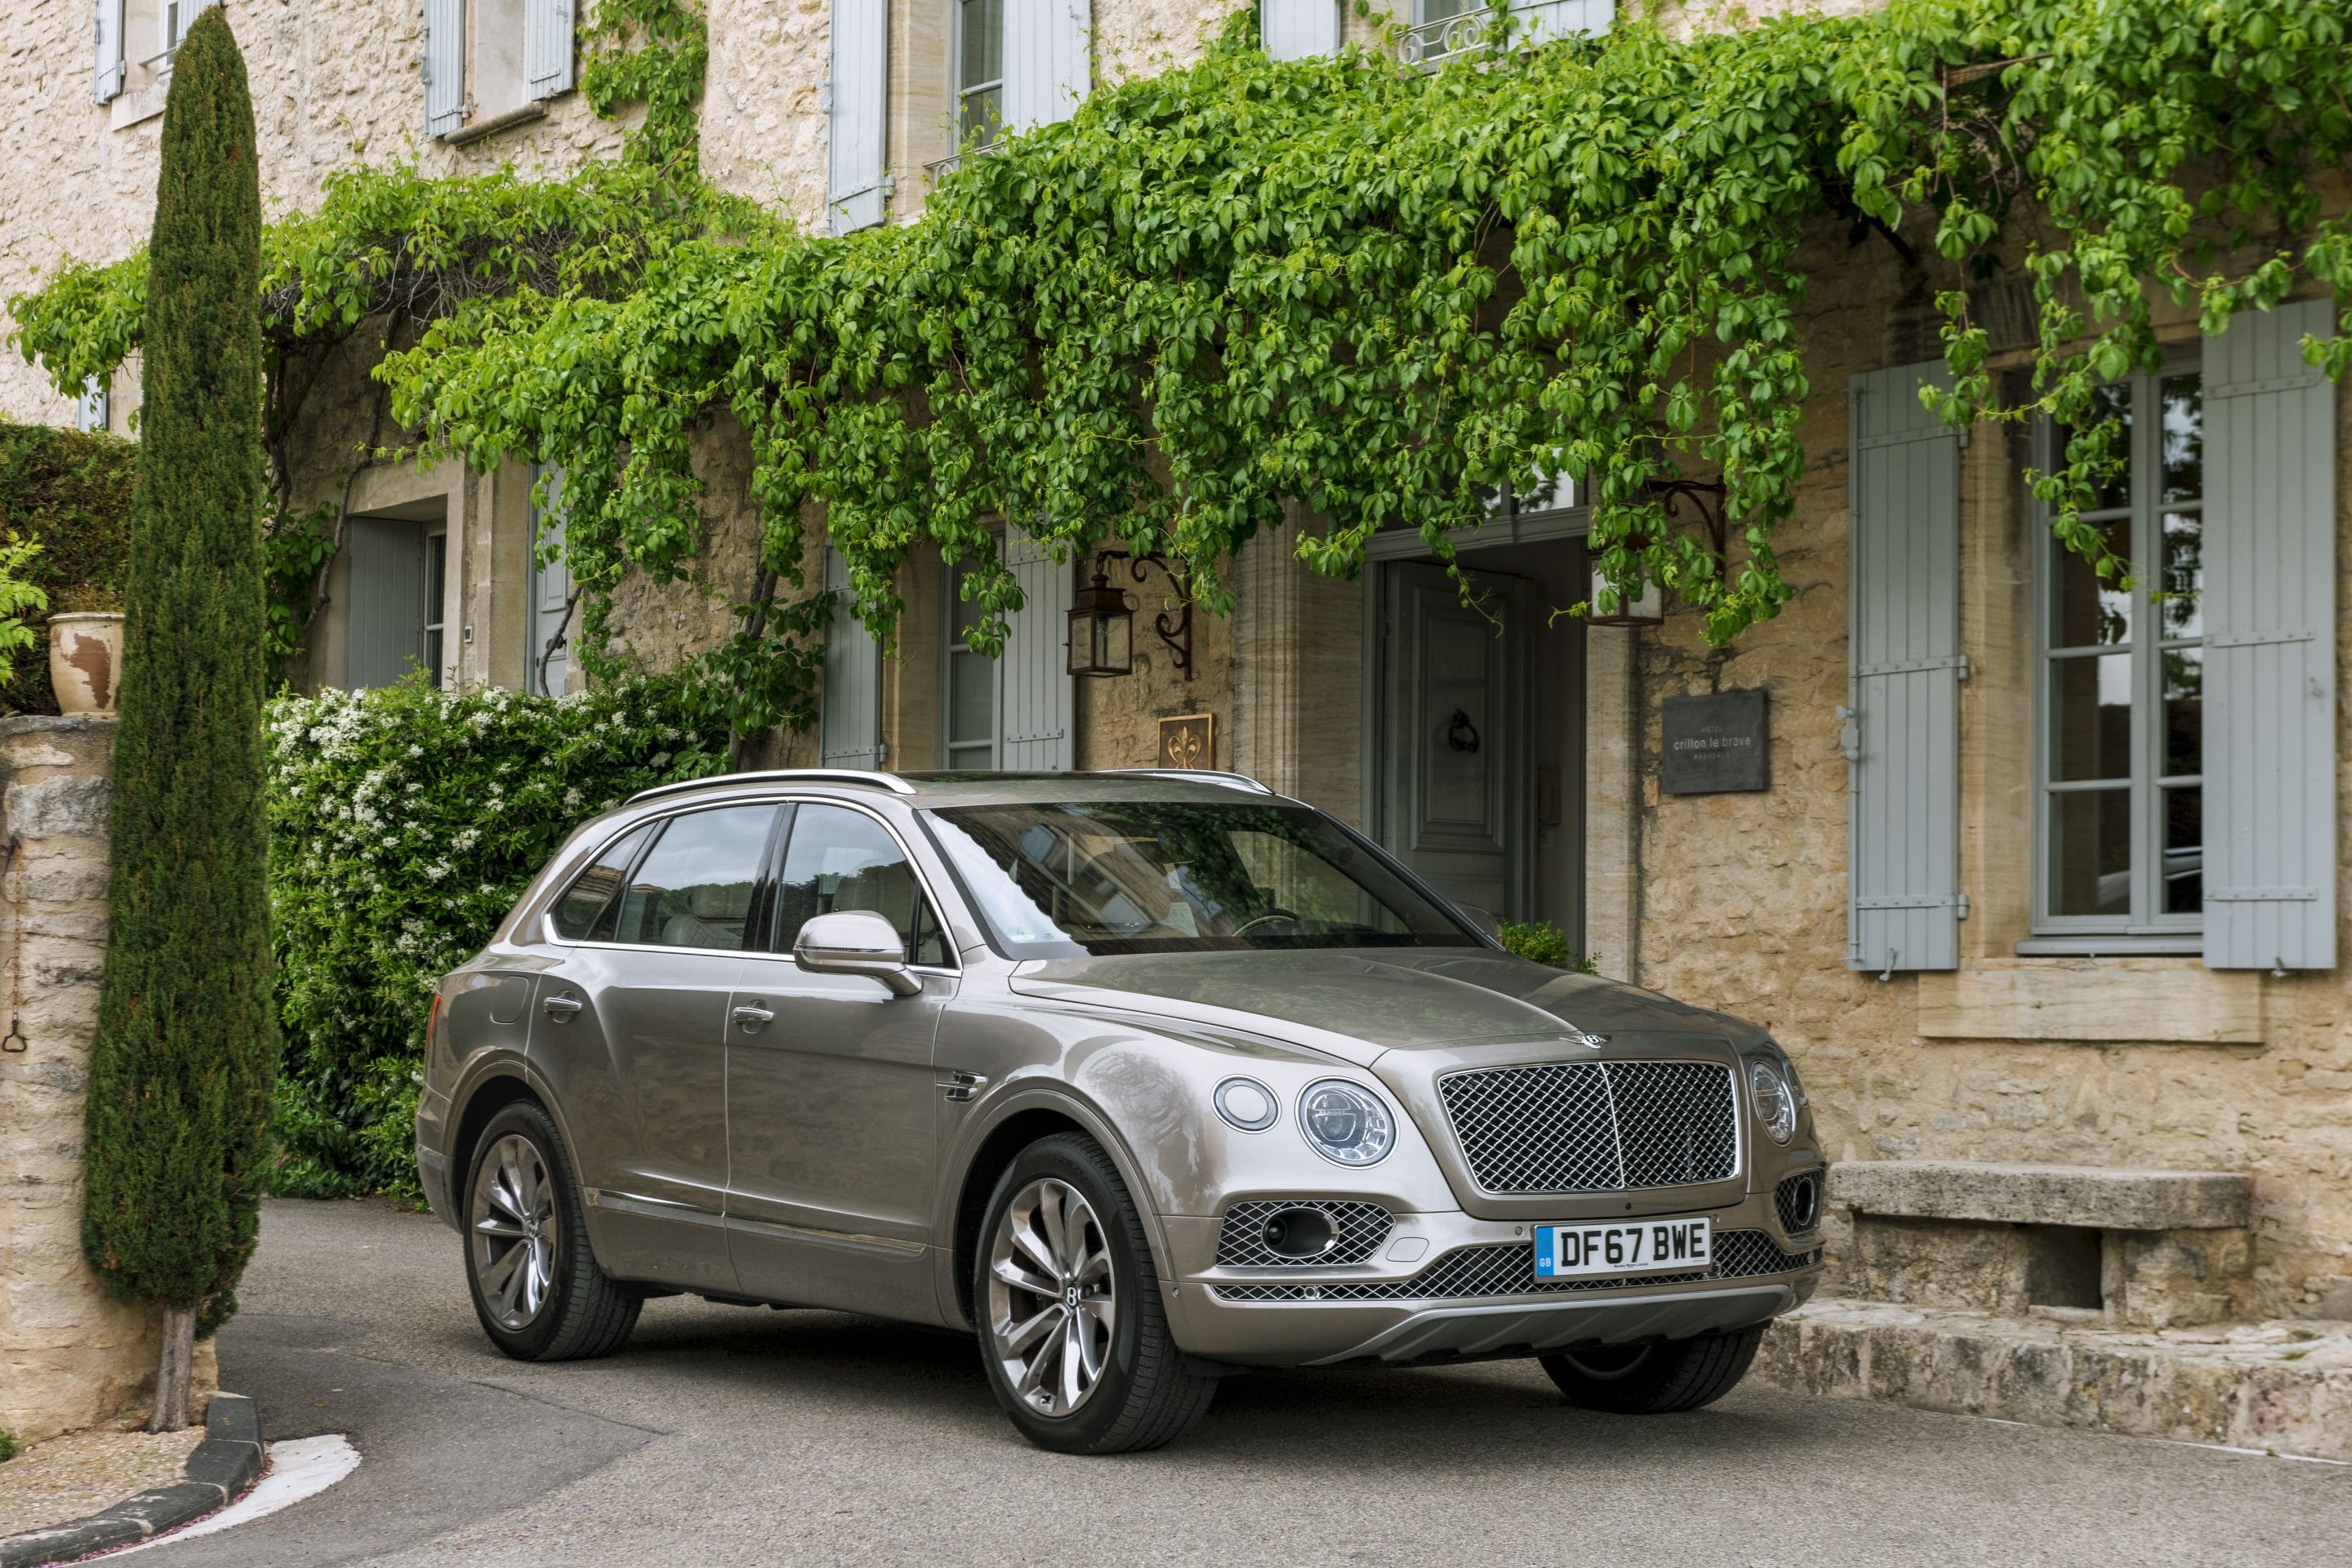 Commercial automotive photography of a Bentley Bentayga and cyclist Adrian Timmis by photographer Michael Schauer for Bentley Motors in the Provence region of south France